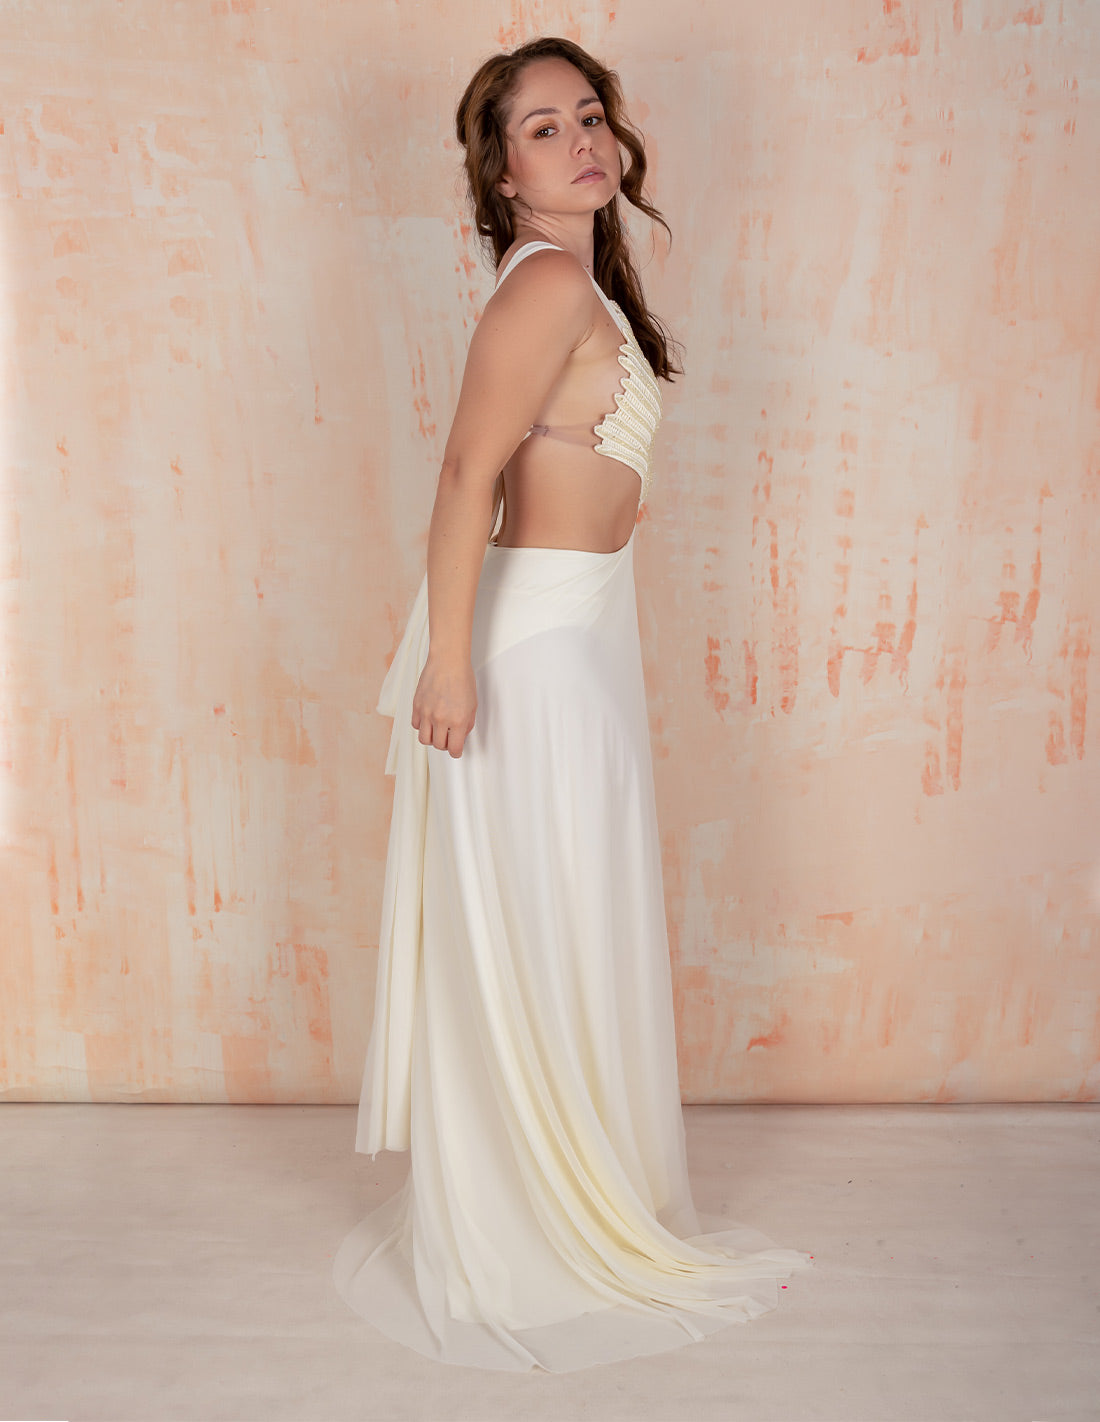 Feather Glow Dress Ivory. Dress With Hand Woven Macramé In Ivory. Entreaguas